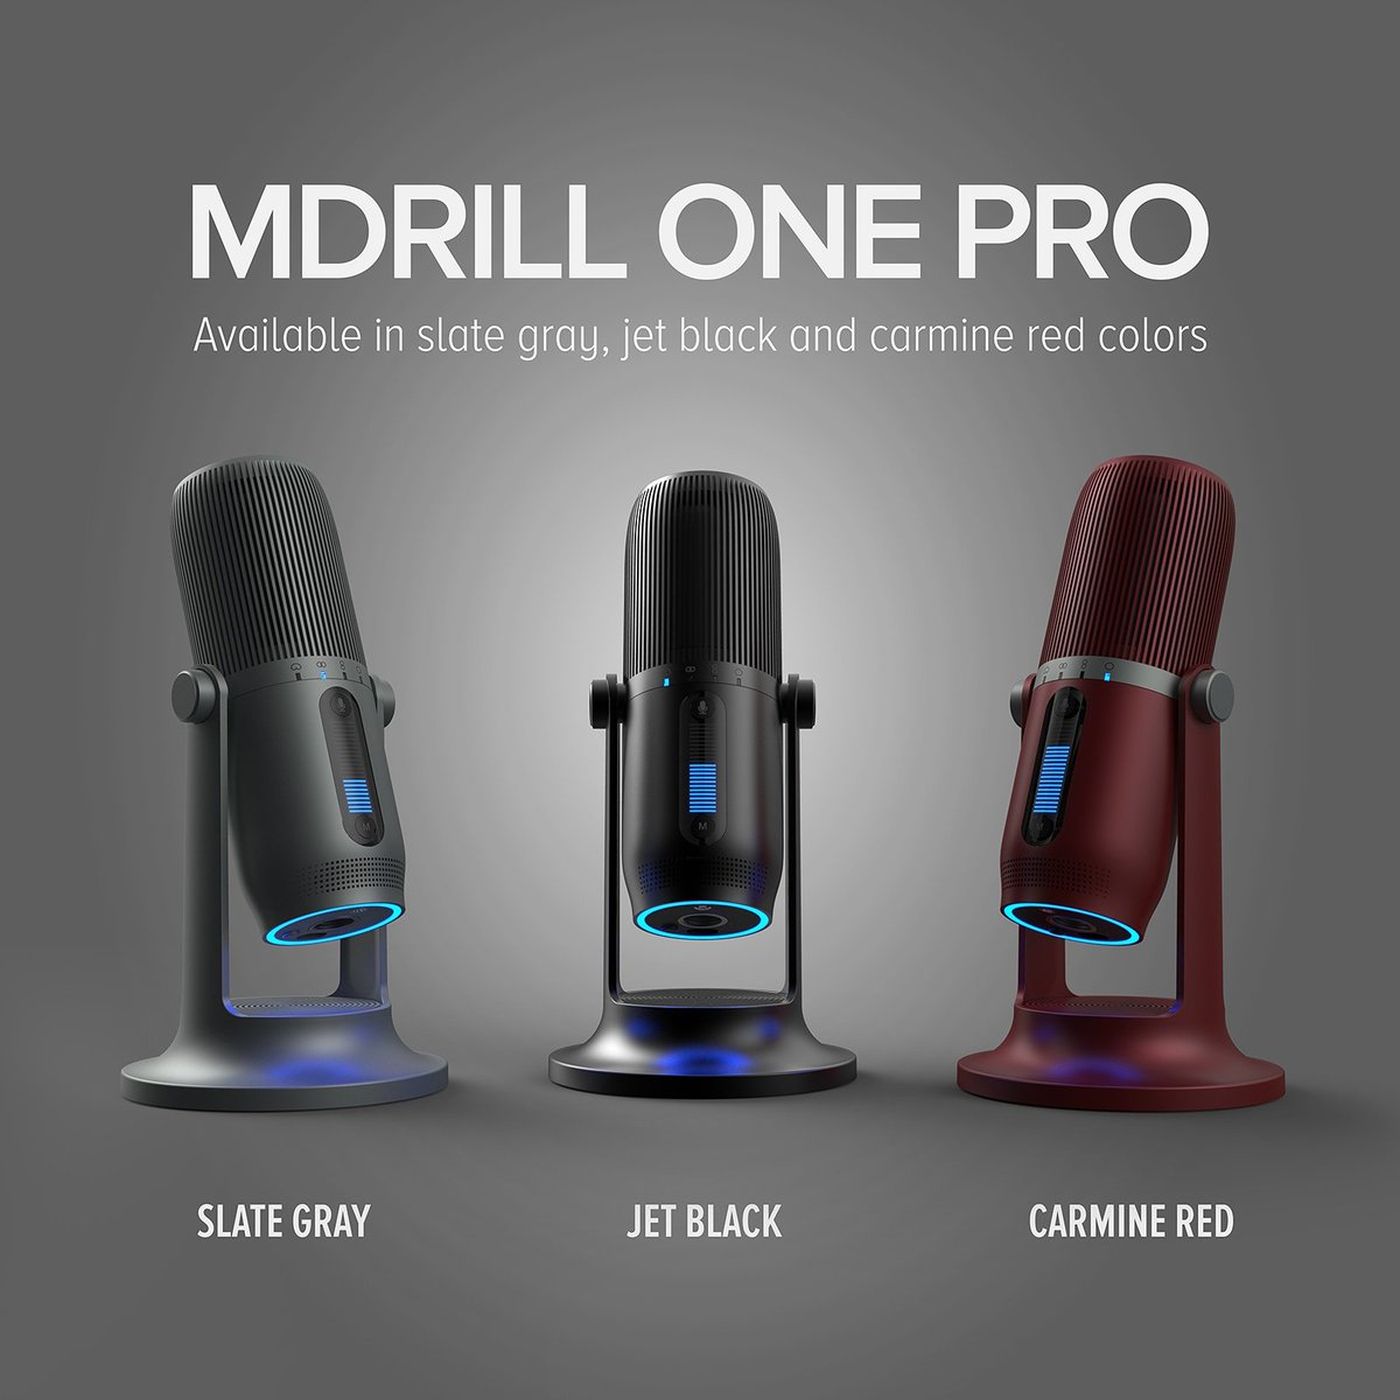 Mdrill One Pro